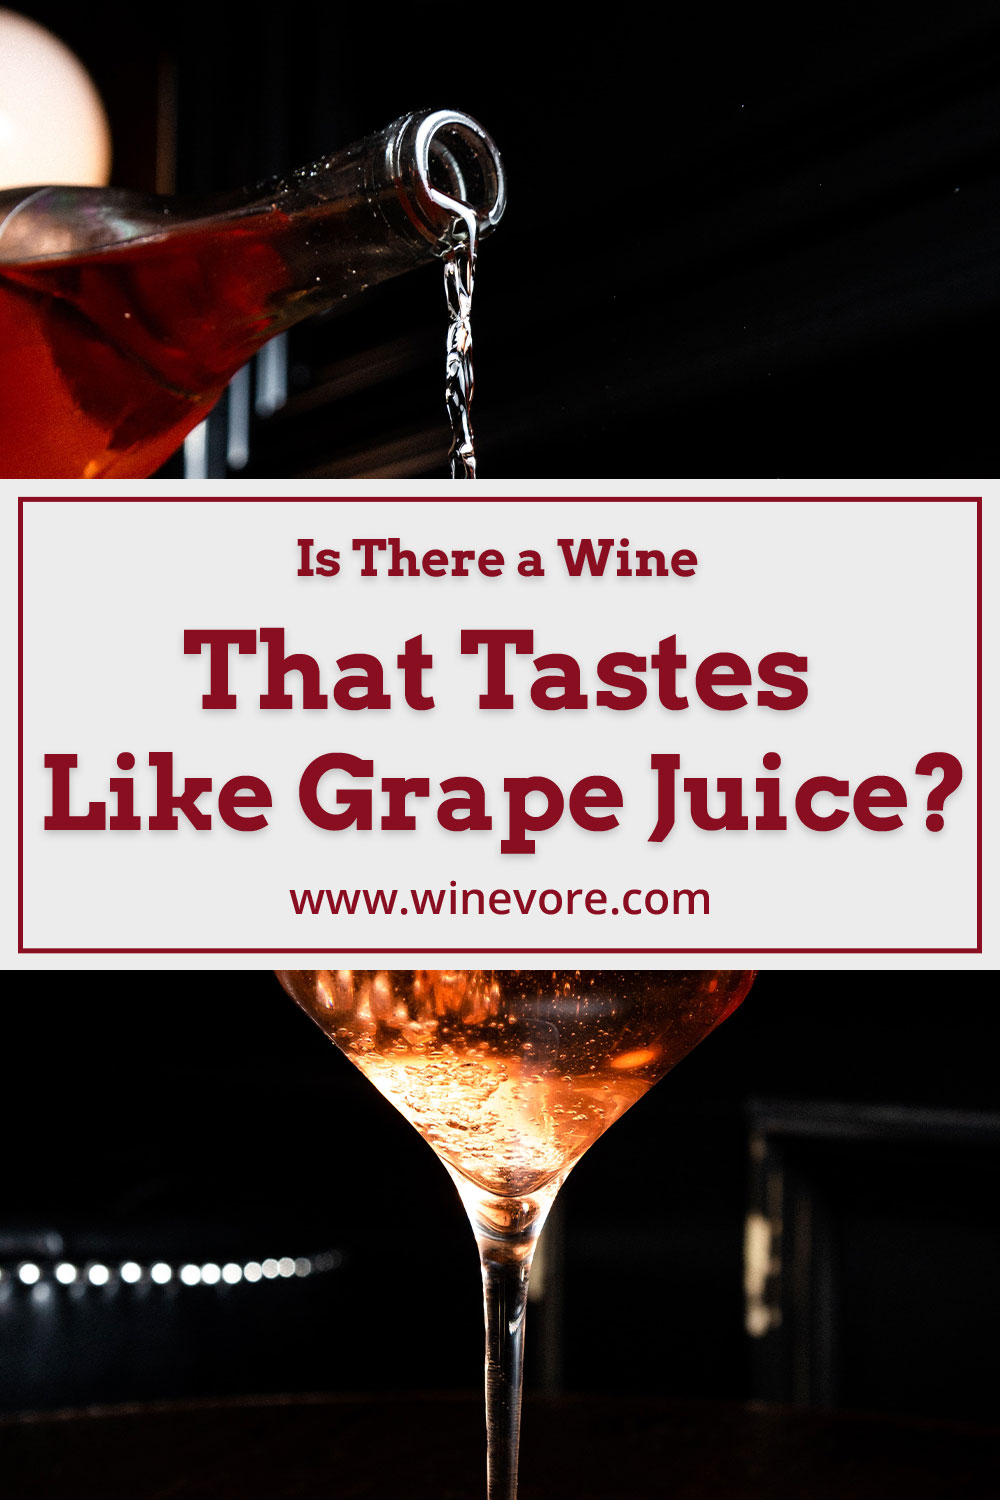 Wine being poured on a glass from a bottle - Is There a Wine That Tastes Like Grape Juice?